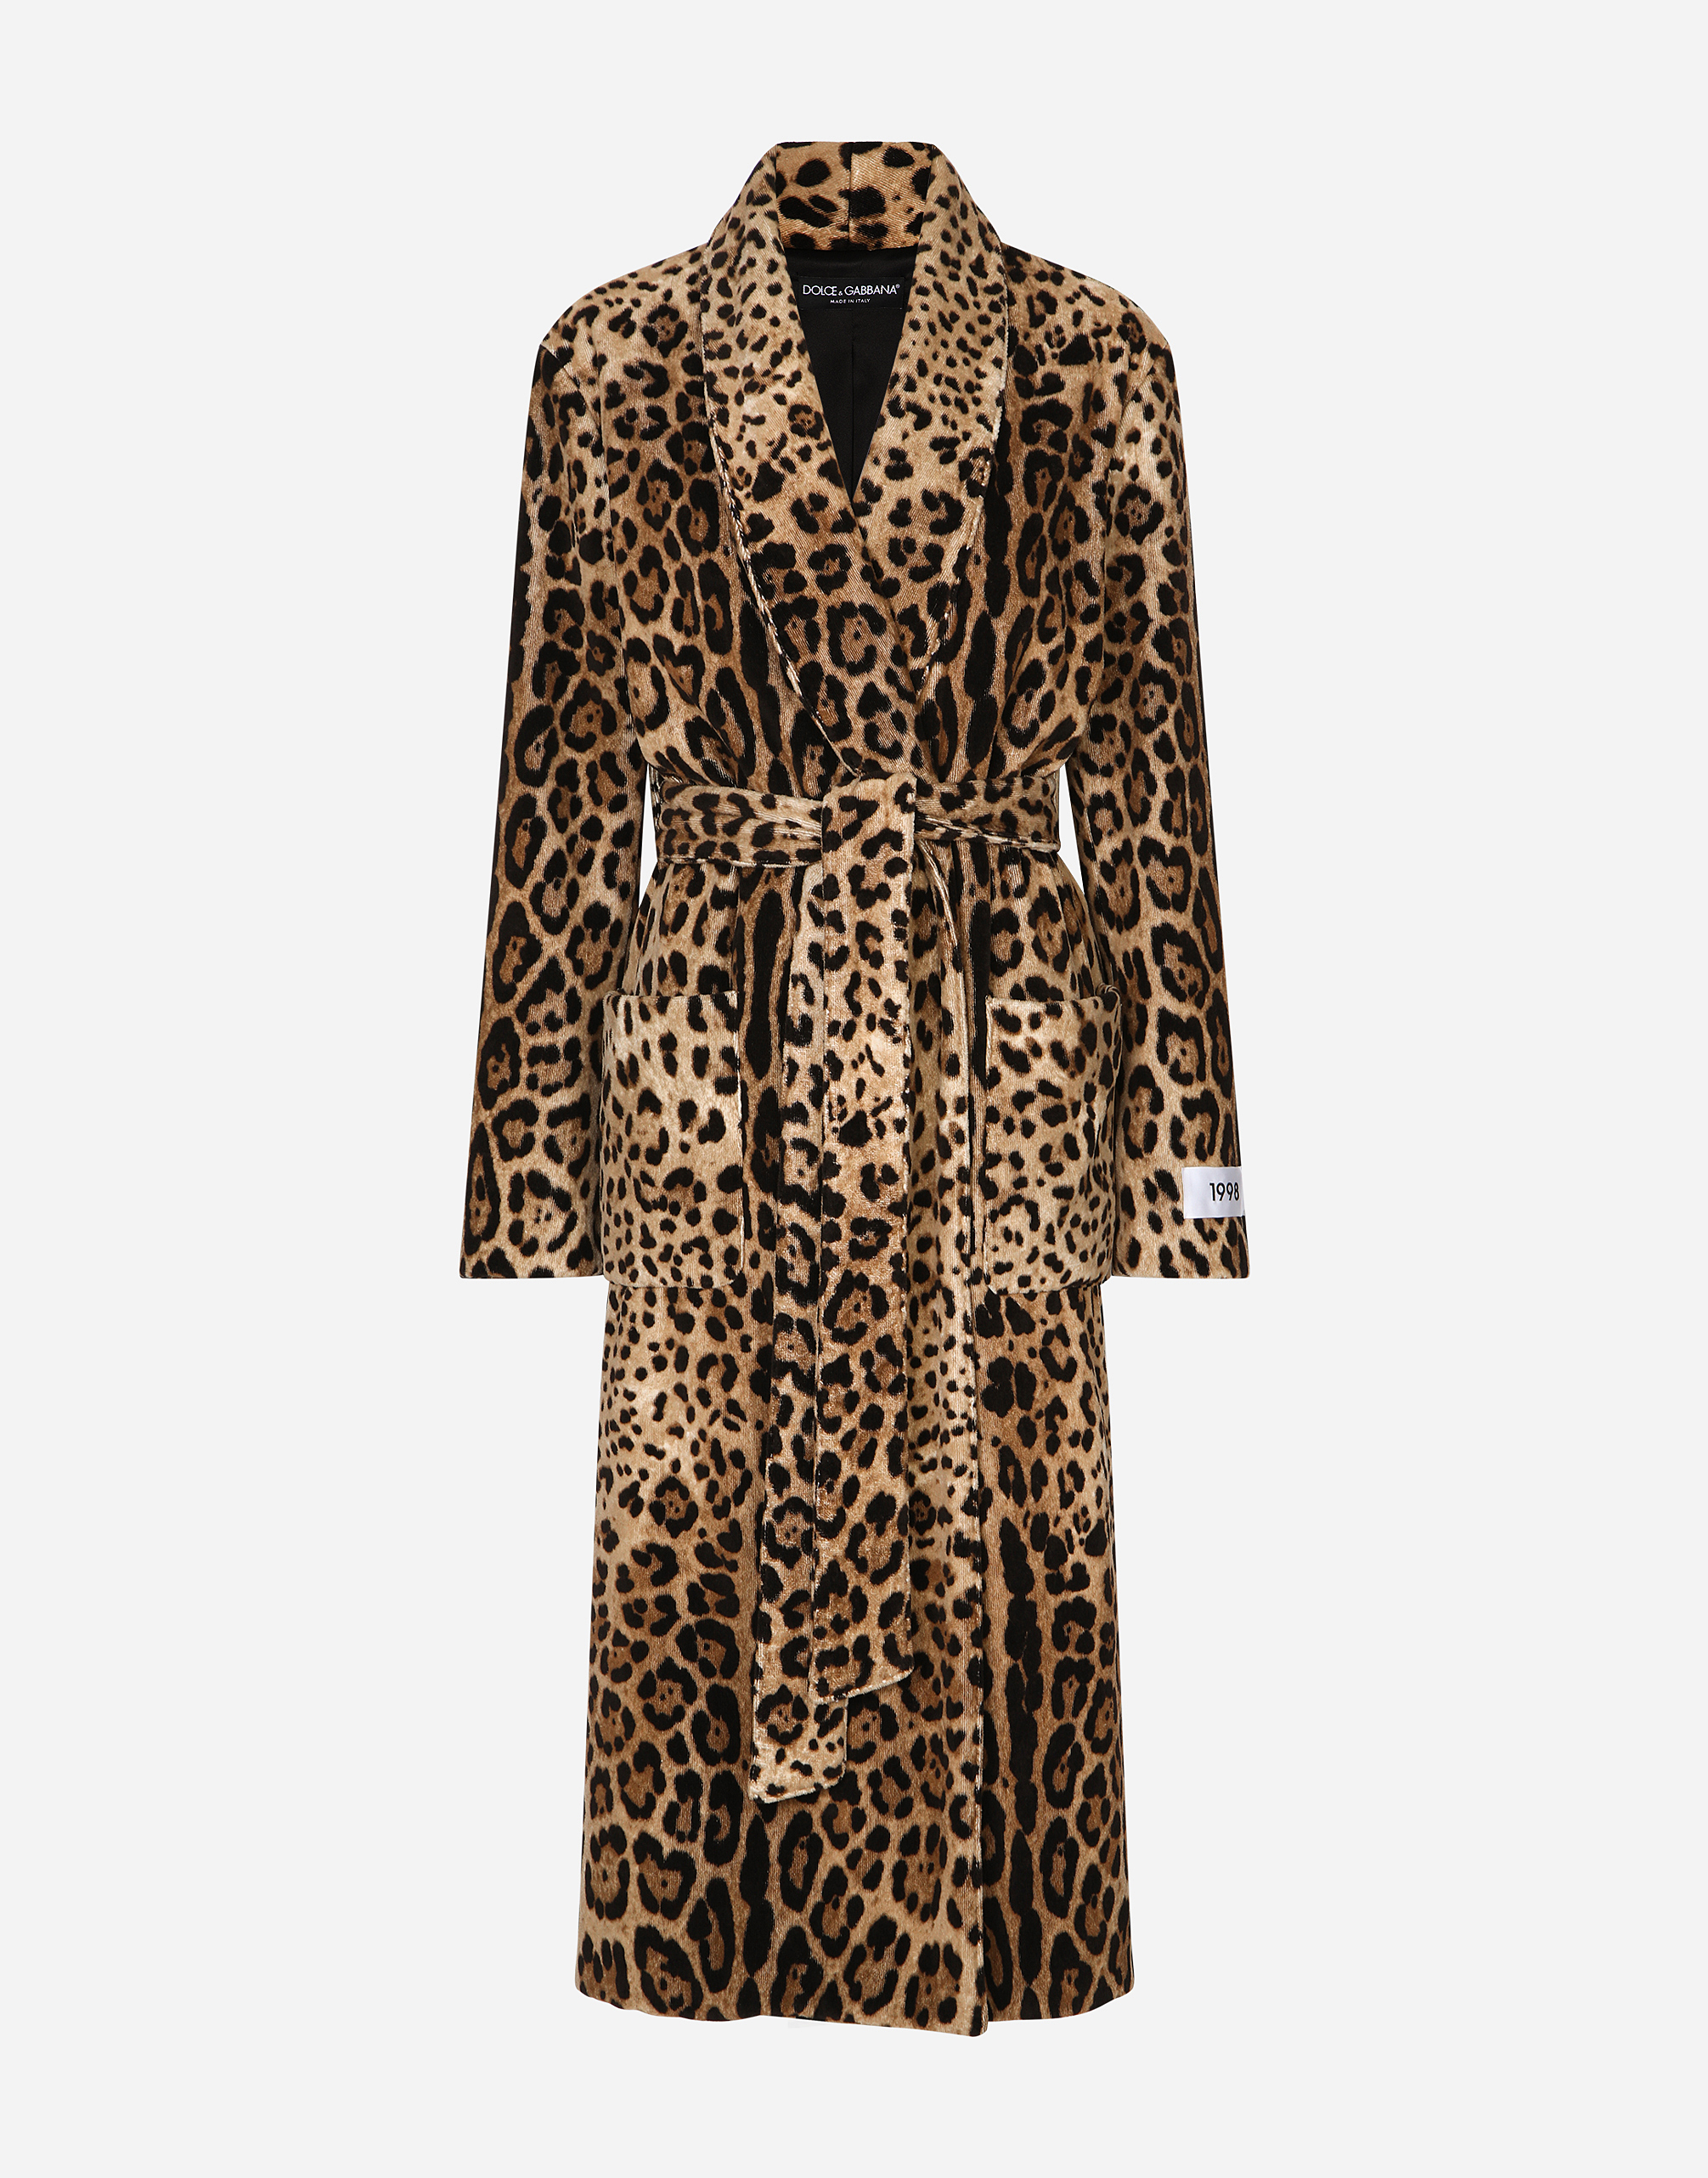 KIM DOLCE&GABBANA Leopard-print terrycloth coat with belt and the Re-Edition label in Animal Print